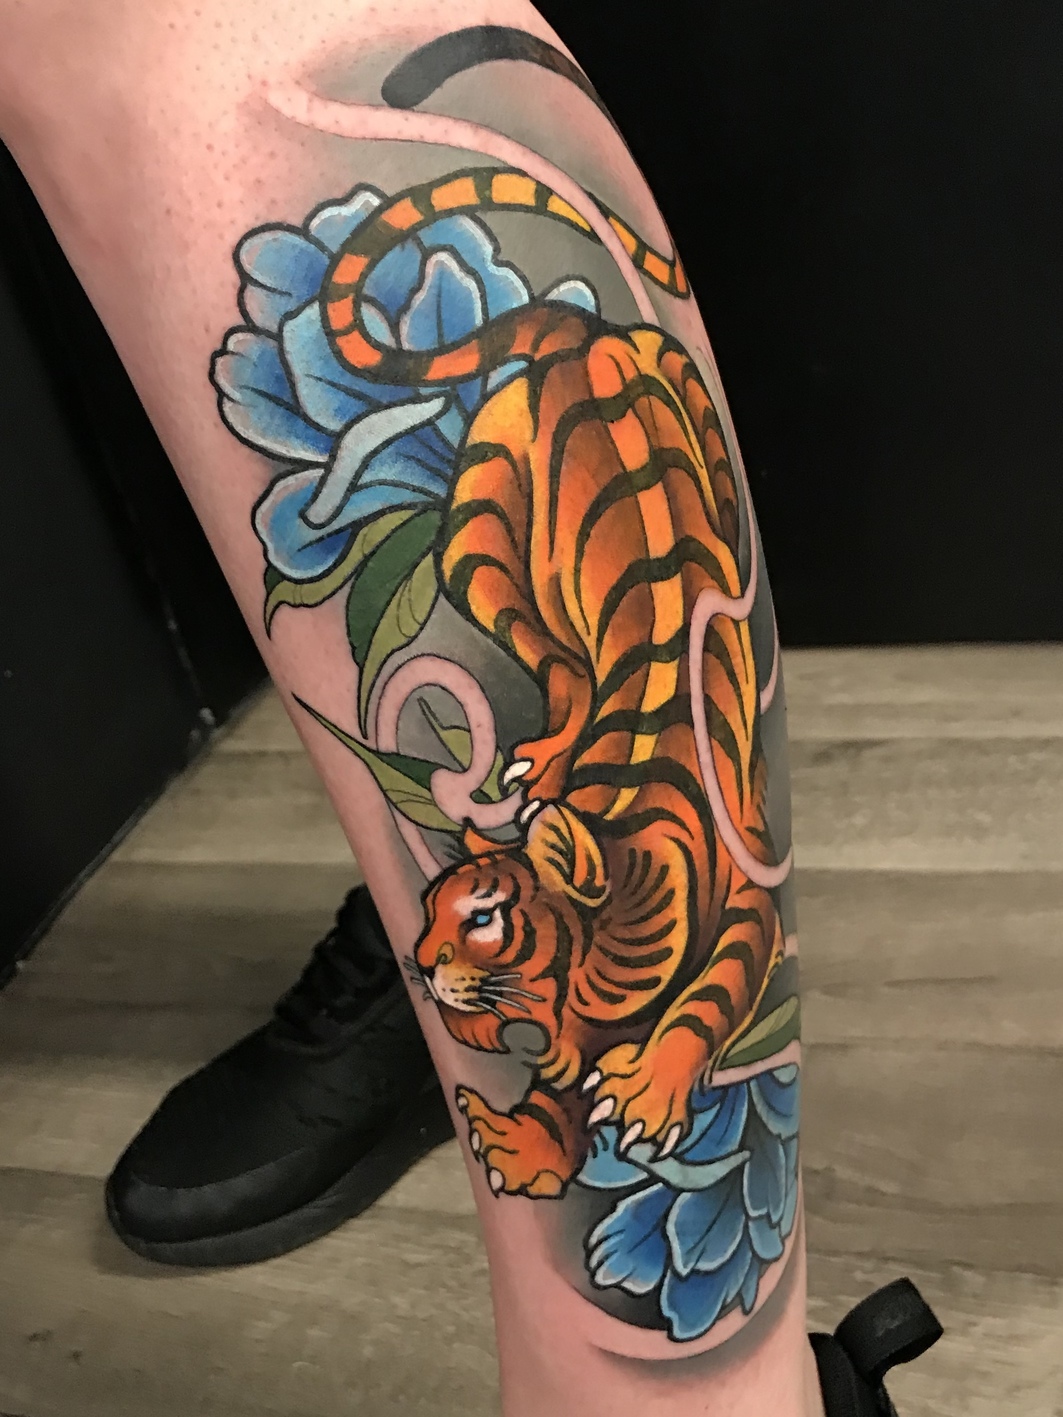 Tiger japanese neotraditional